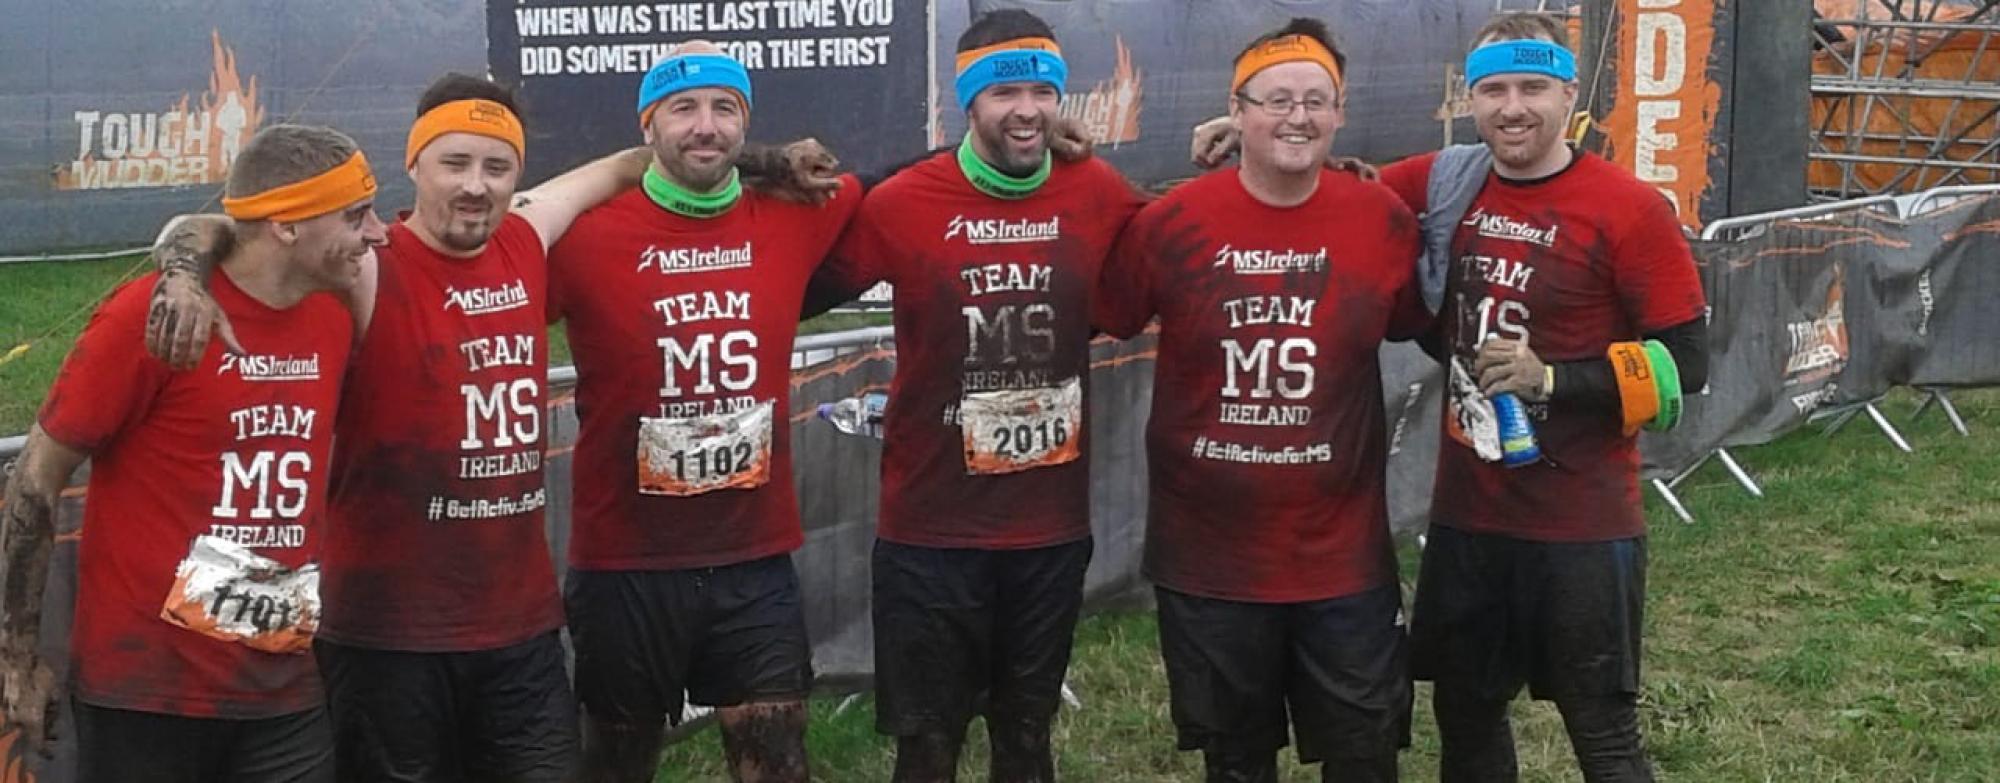 Tough Mudder Group Picture